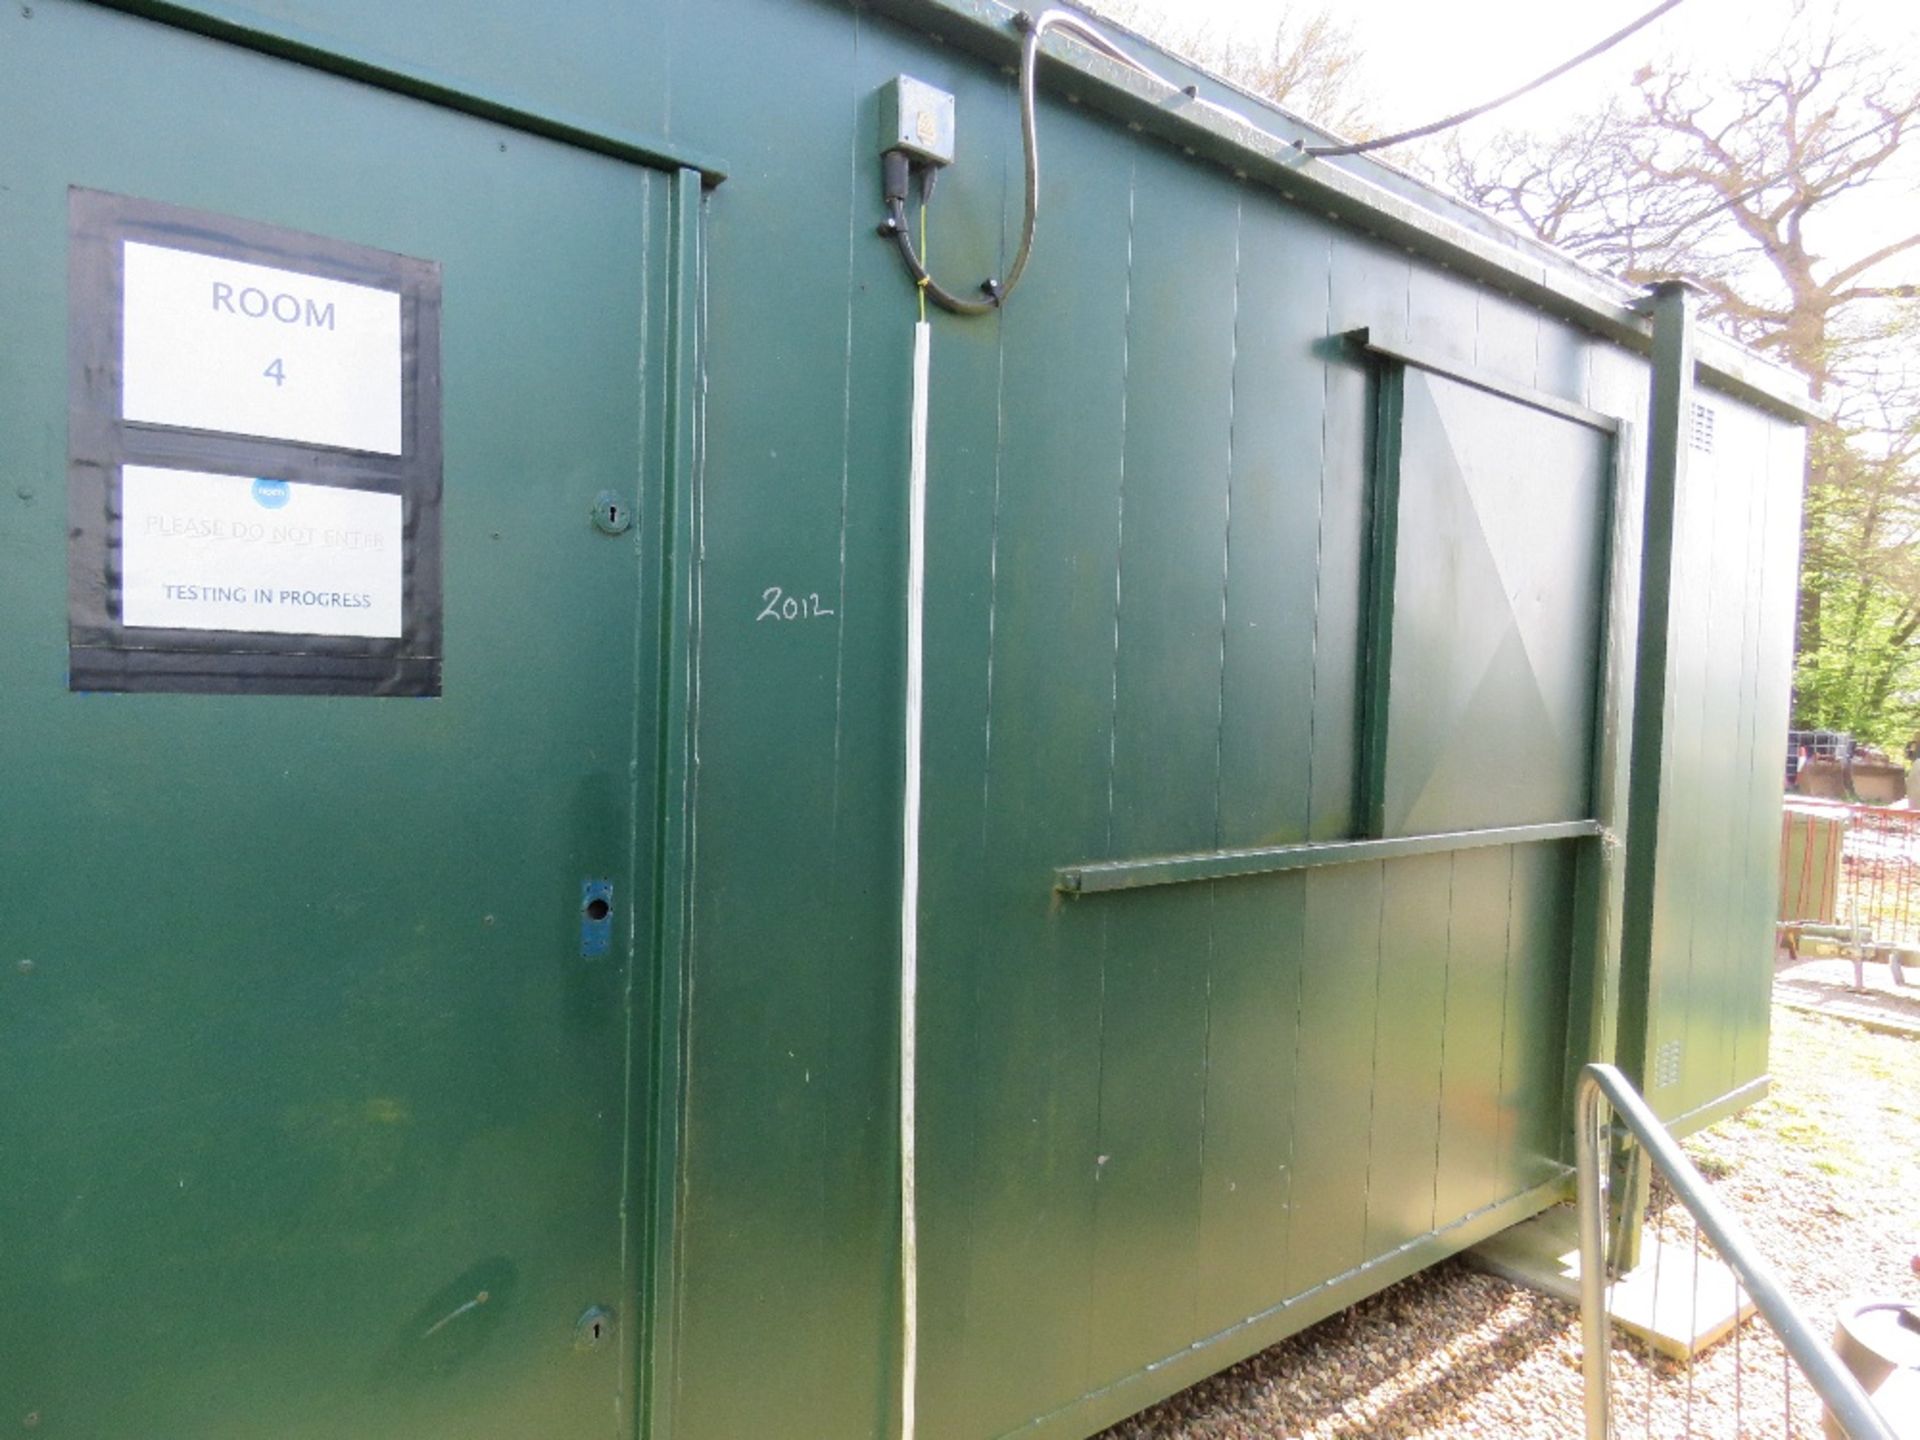 PORTABLE SITE OFFICE 24FT X 8FT APPROX OPEN PLAN AS SHOWN.. INCLUDES SOME FURNITURE. BEING SOLD ON B